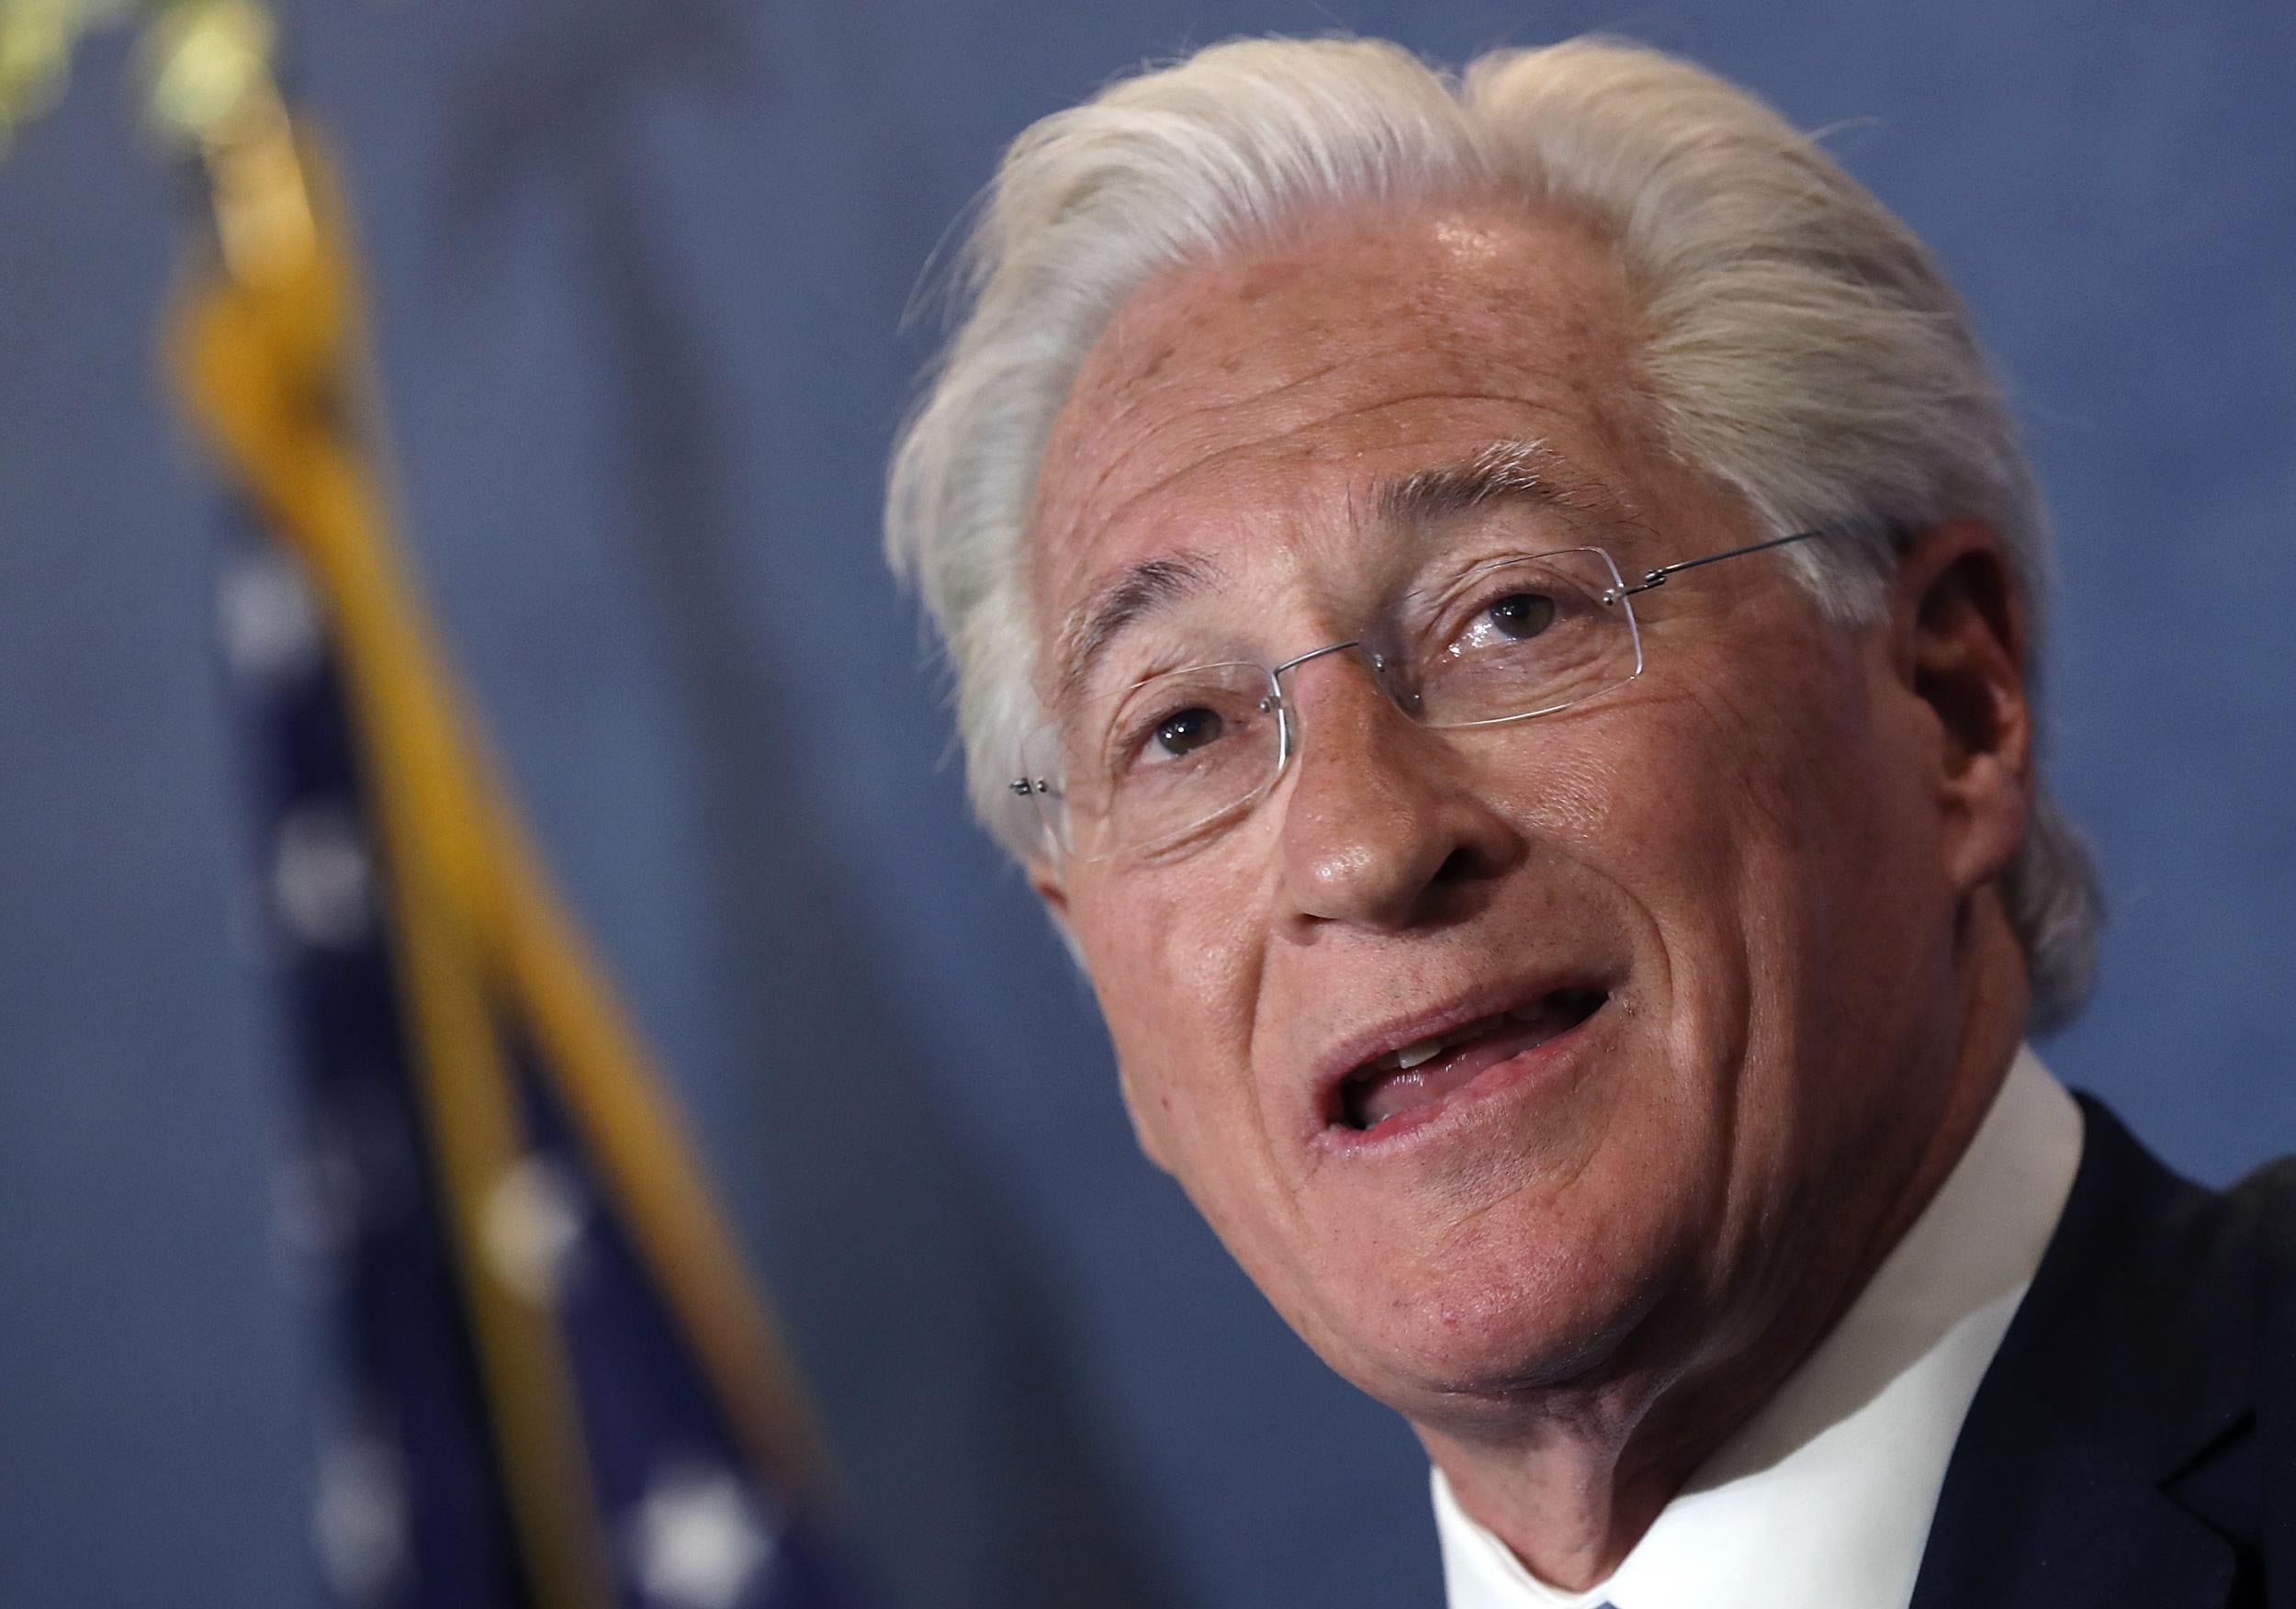 Marc Kasowitz, attorney for President Donald Trump delivers remarks at the National Press Club